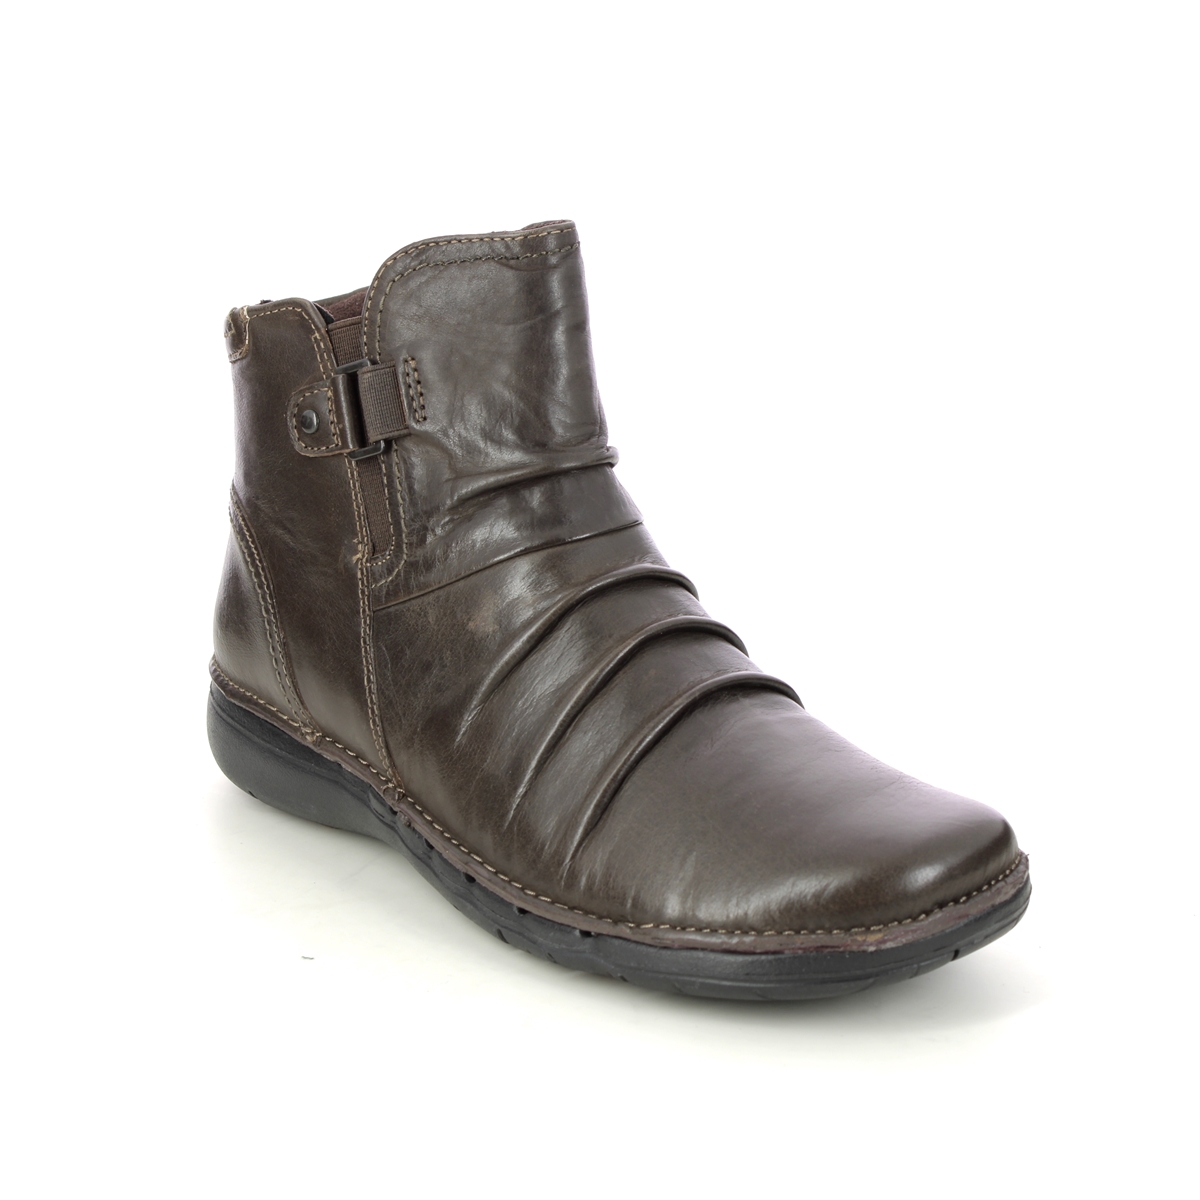 Clarks Un Loop Top Brown Leather Womens Ankle Boots 686624D In Size 5 In Plain Brown Leather